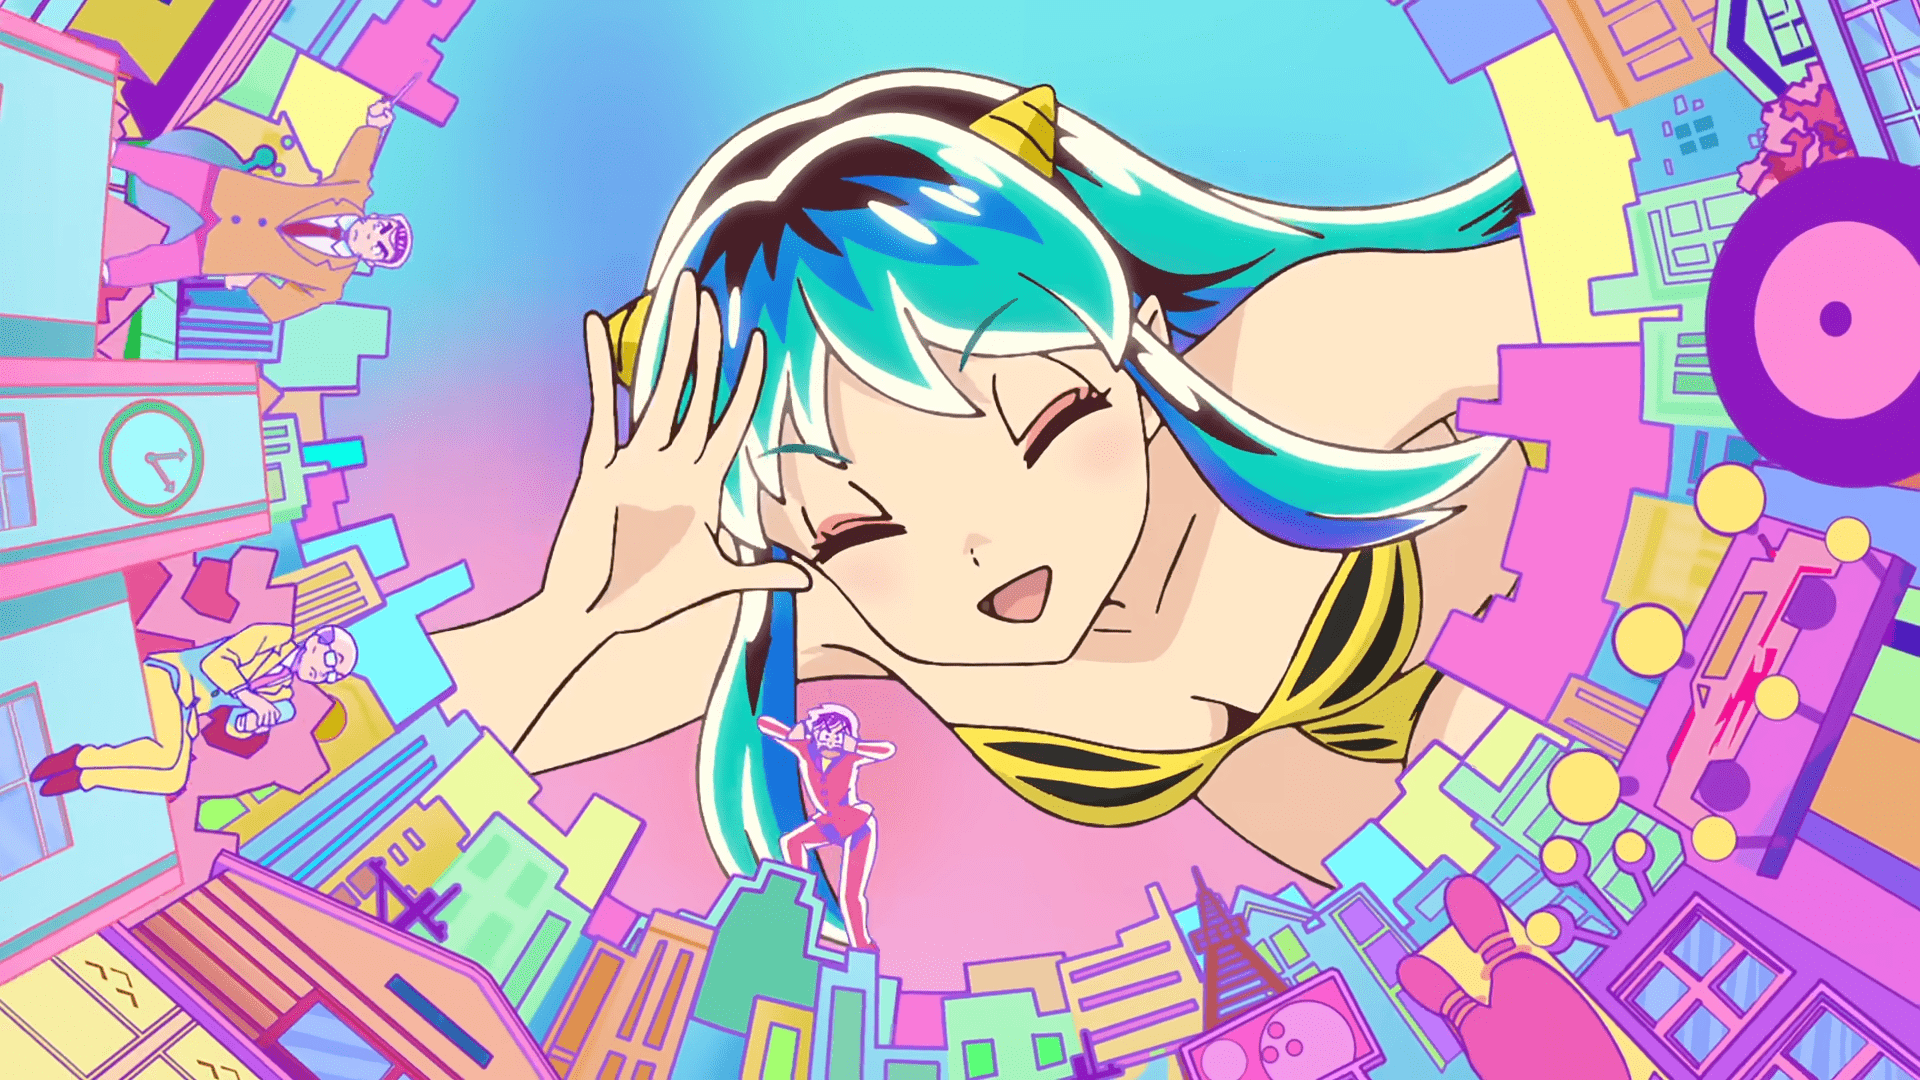 The new Urusei Yatsura OP is on our list of can't-miss anime openings this season!